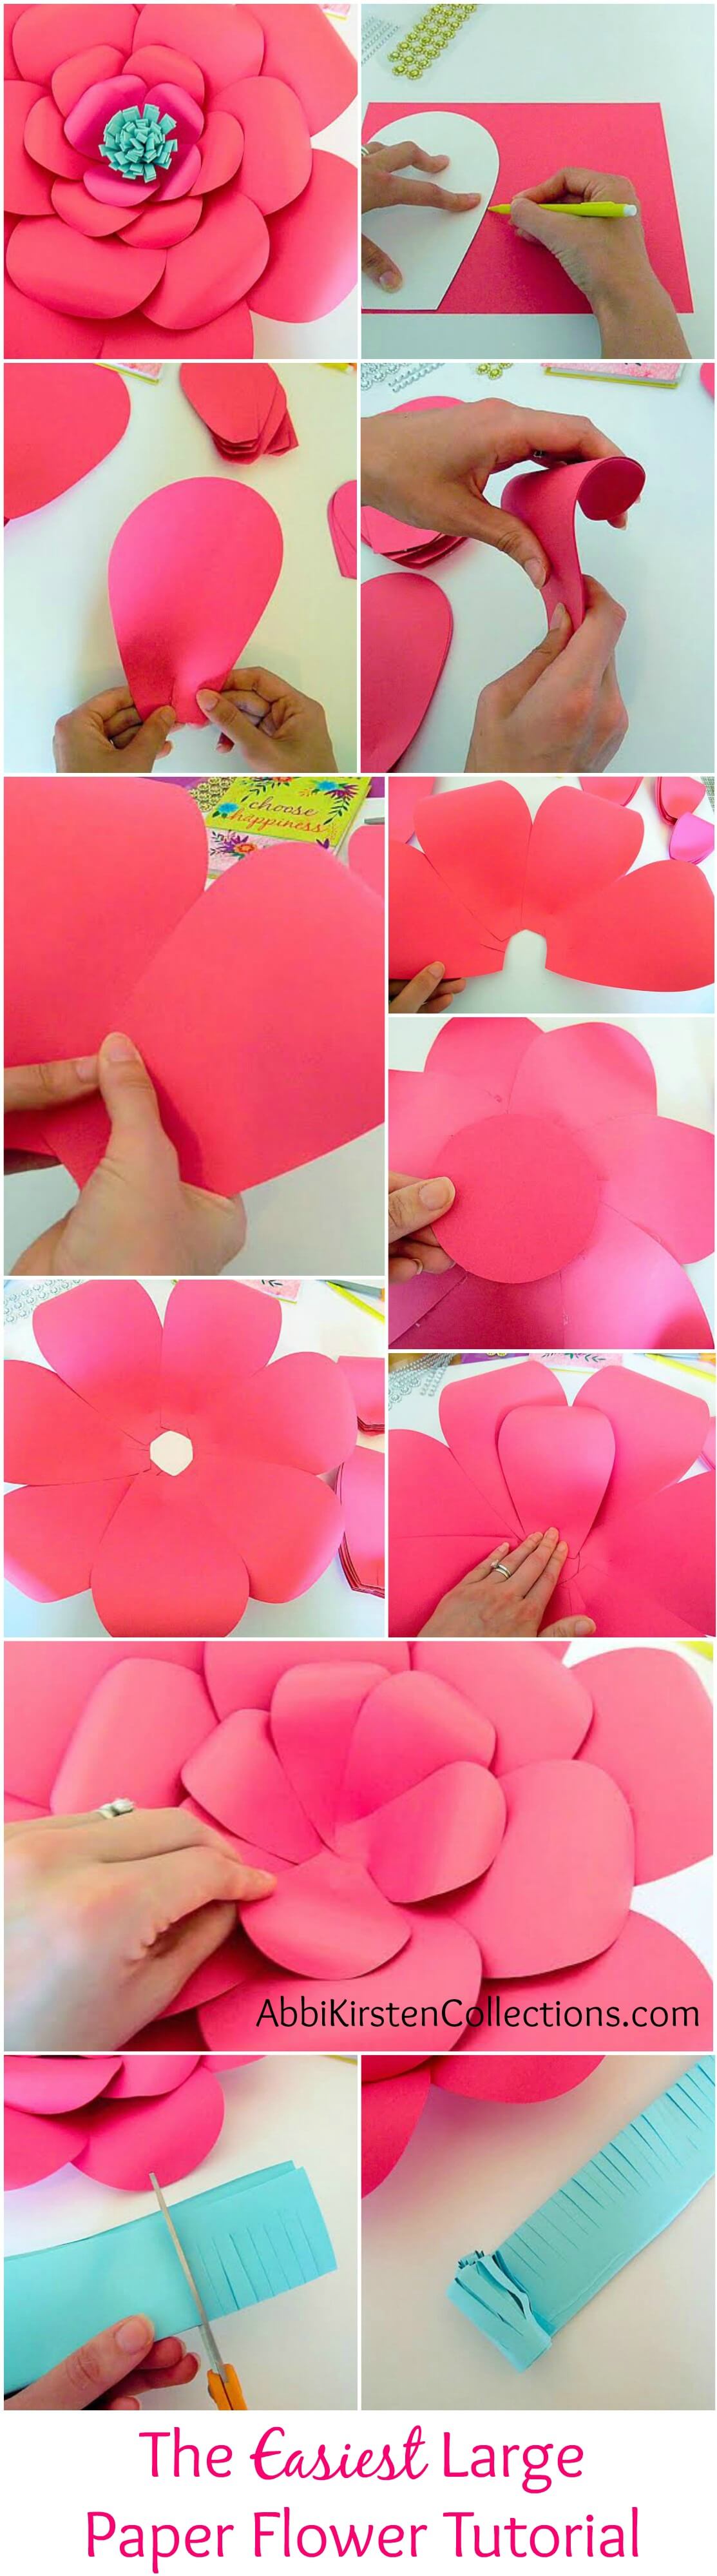 How to make large paper flowers